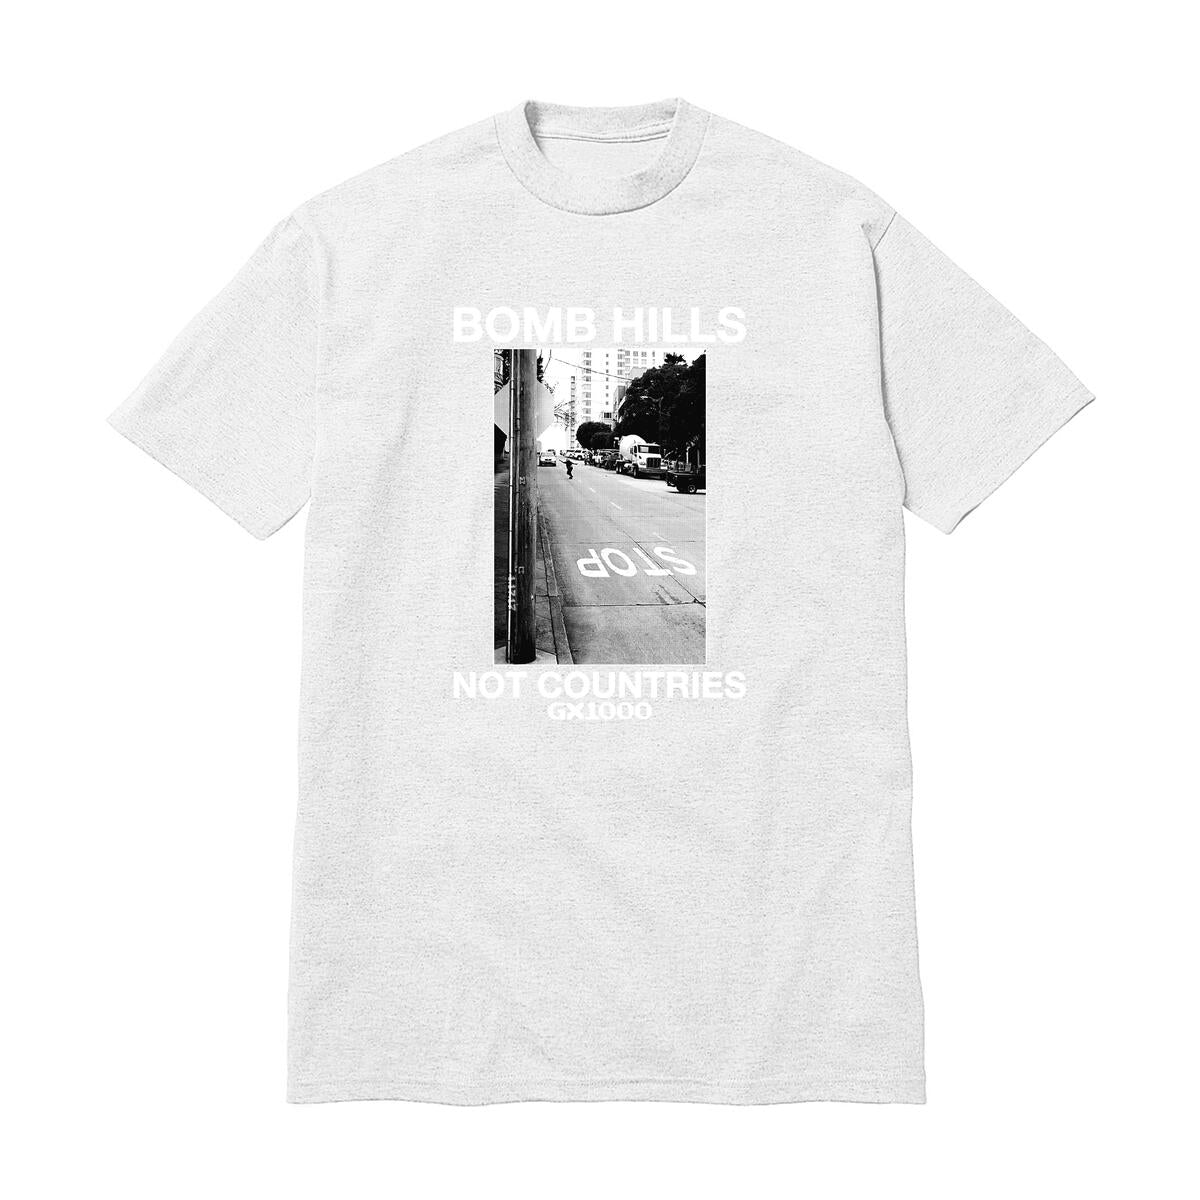 Bomb Hills Not Countries Tee, Ash